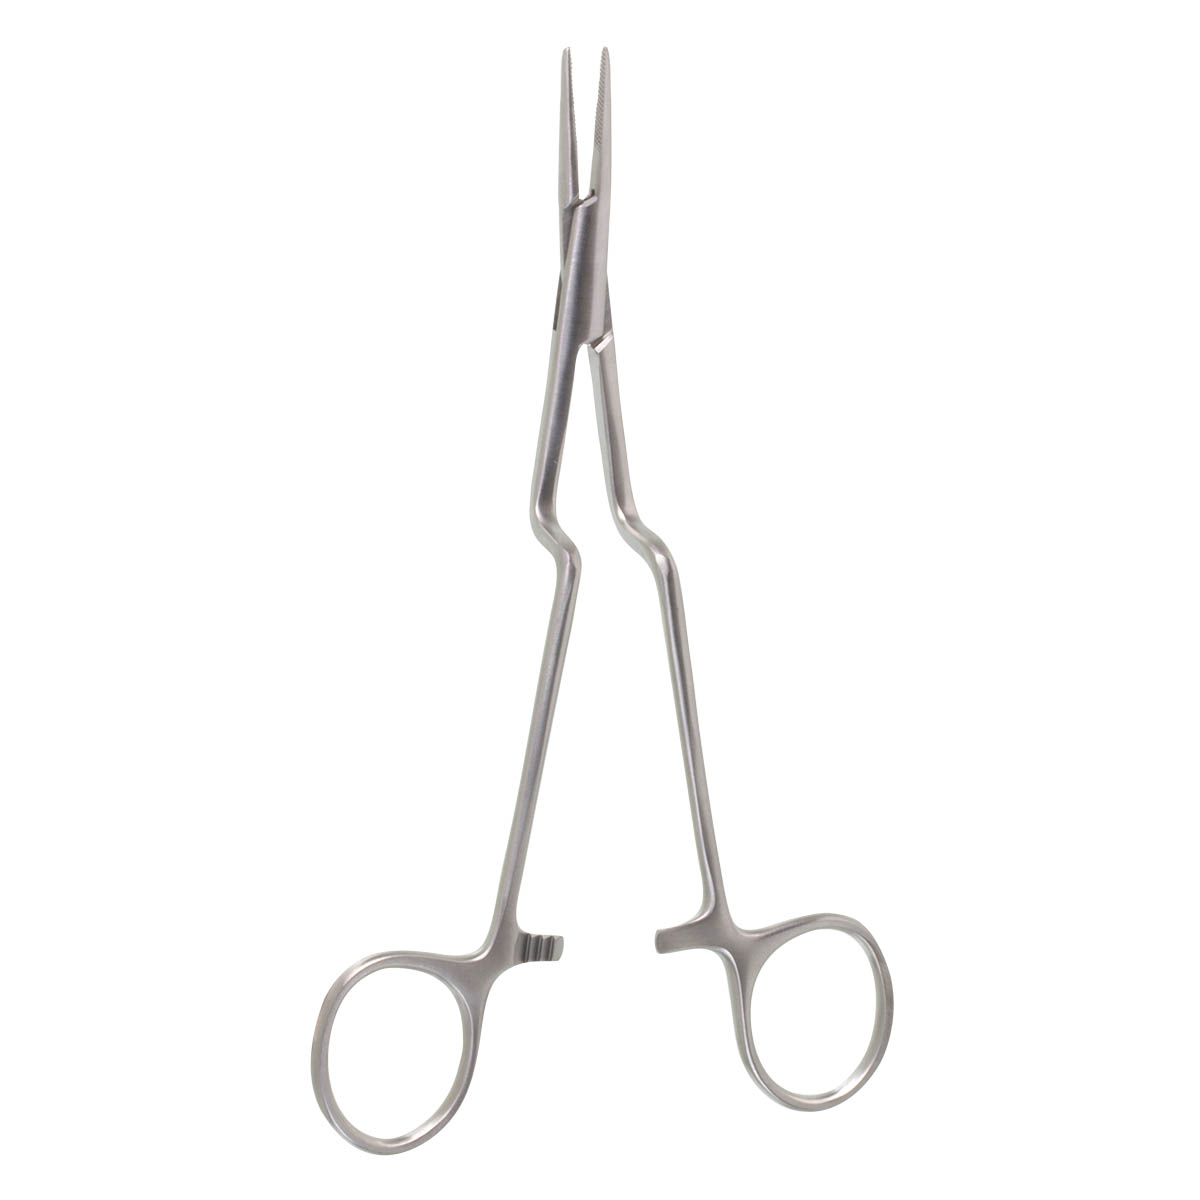 Bozeman Needle Holder Surgical Needle Driver 6 Suture Tying Forceps ANGLED  With Tungsten Carbide Insert ARTMAN - Artman Instruments